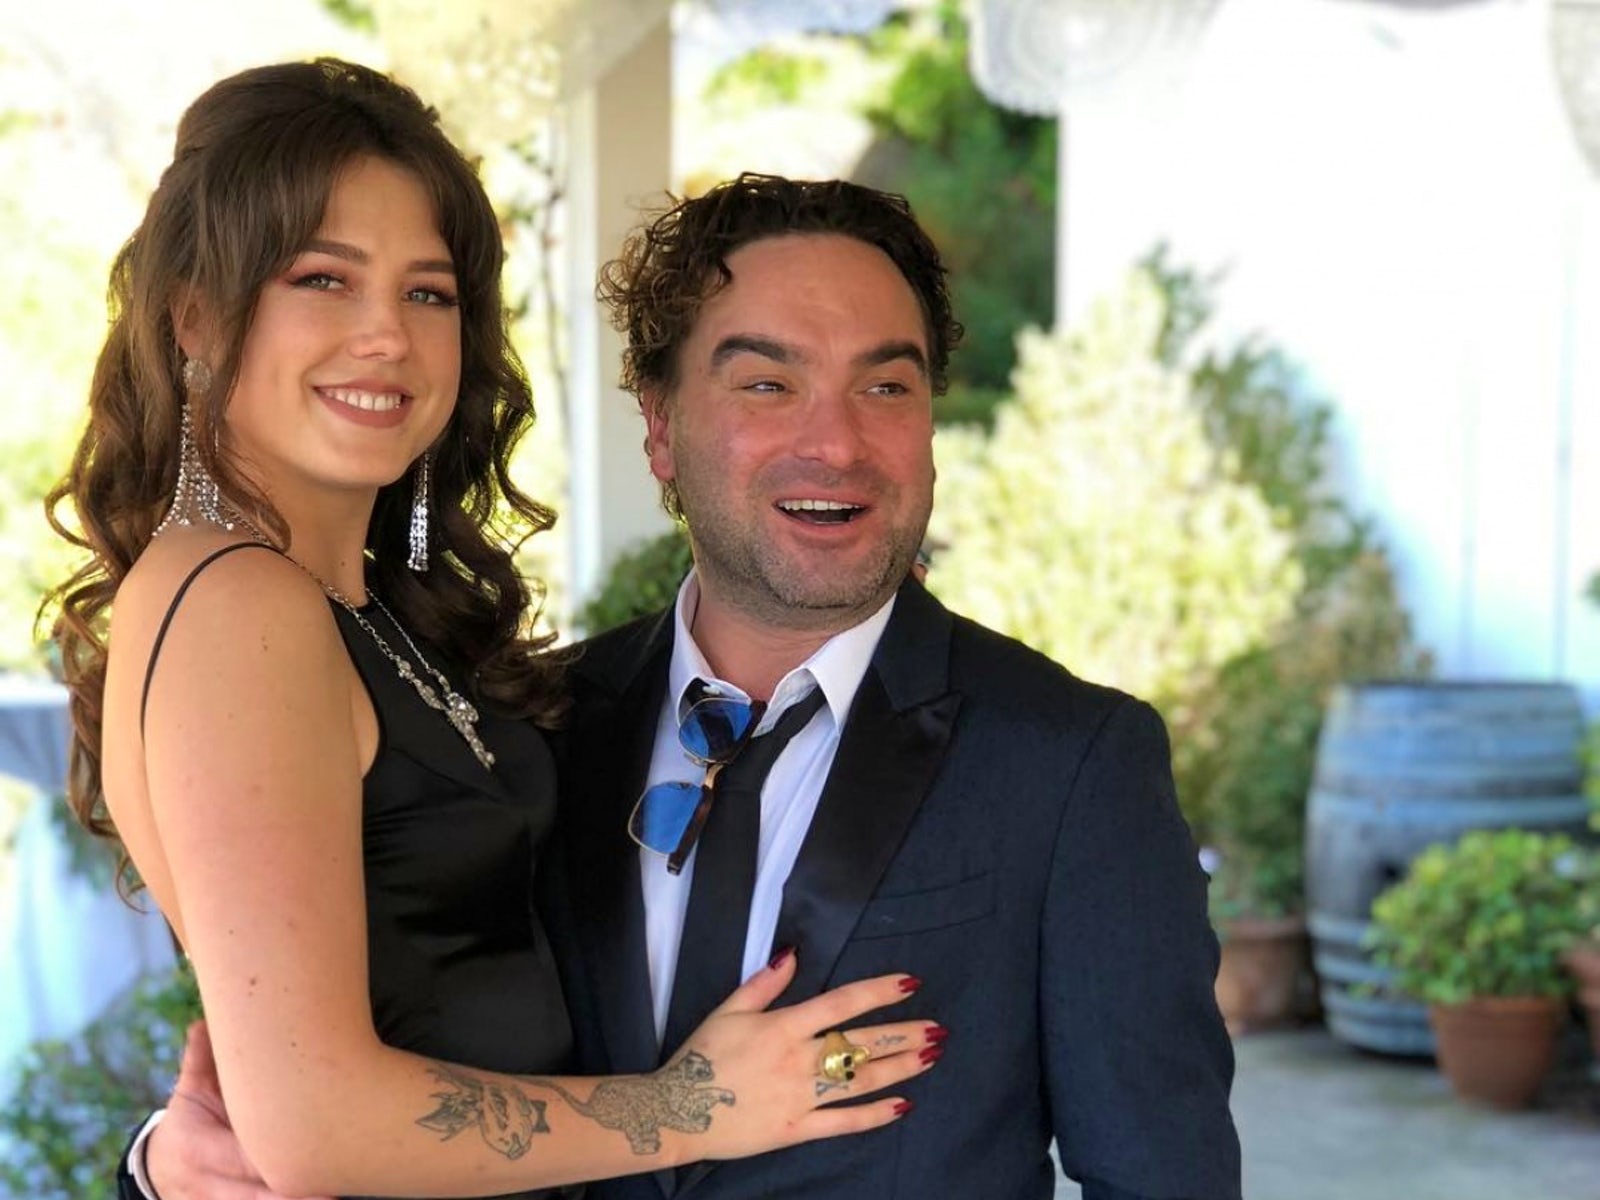 Johnny Galecki and girlfriend Alaina Meyer expecting their first child